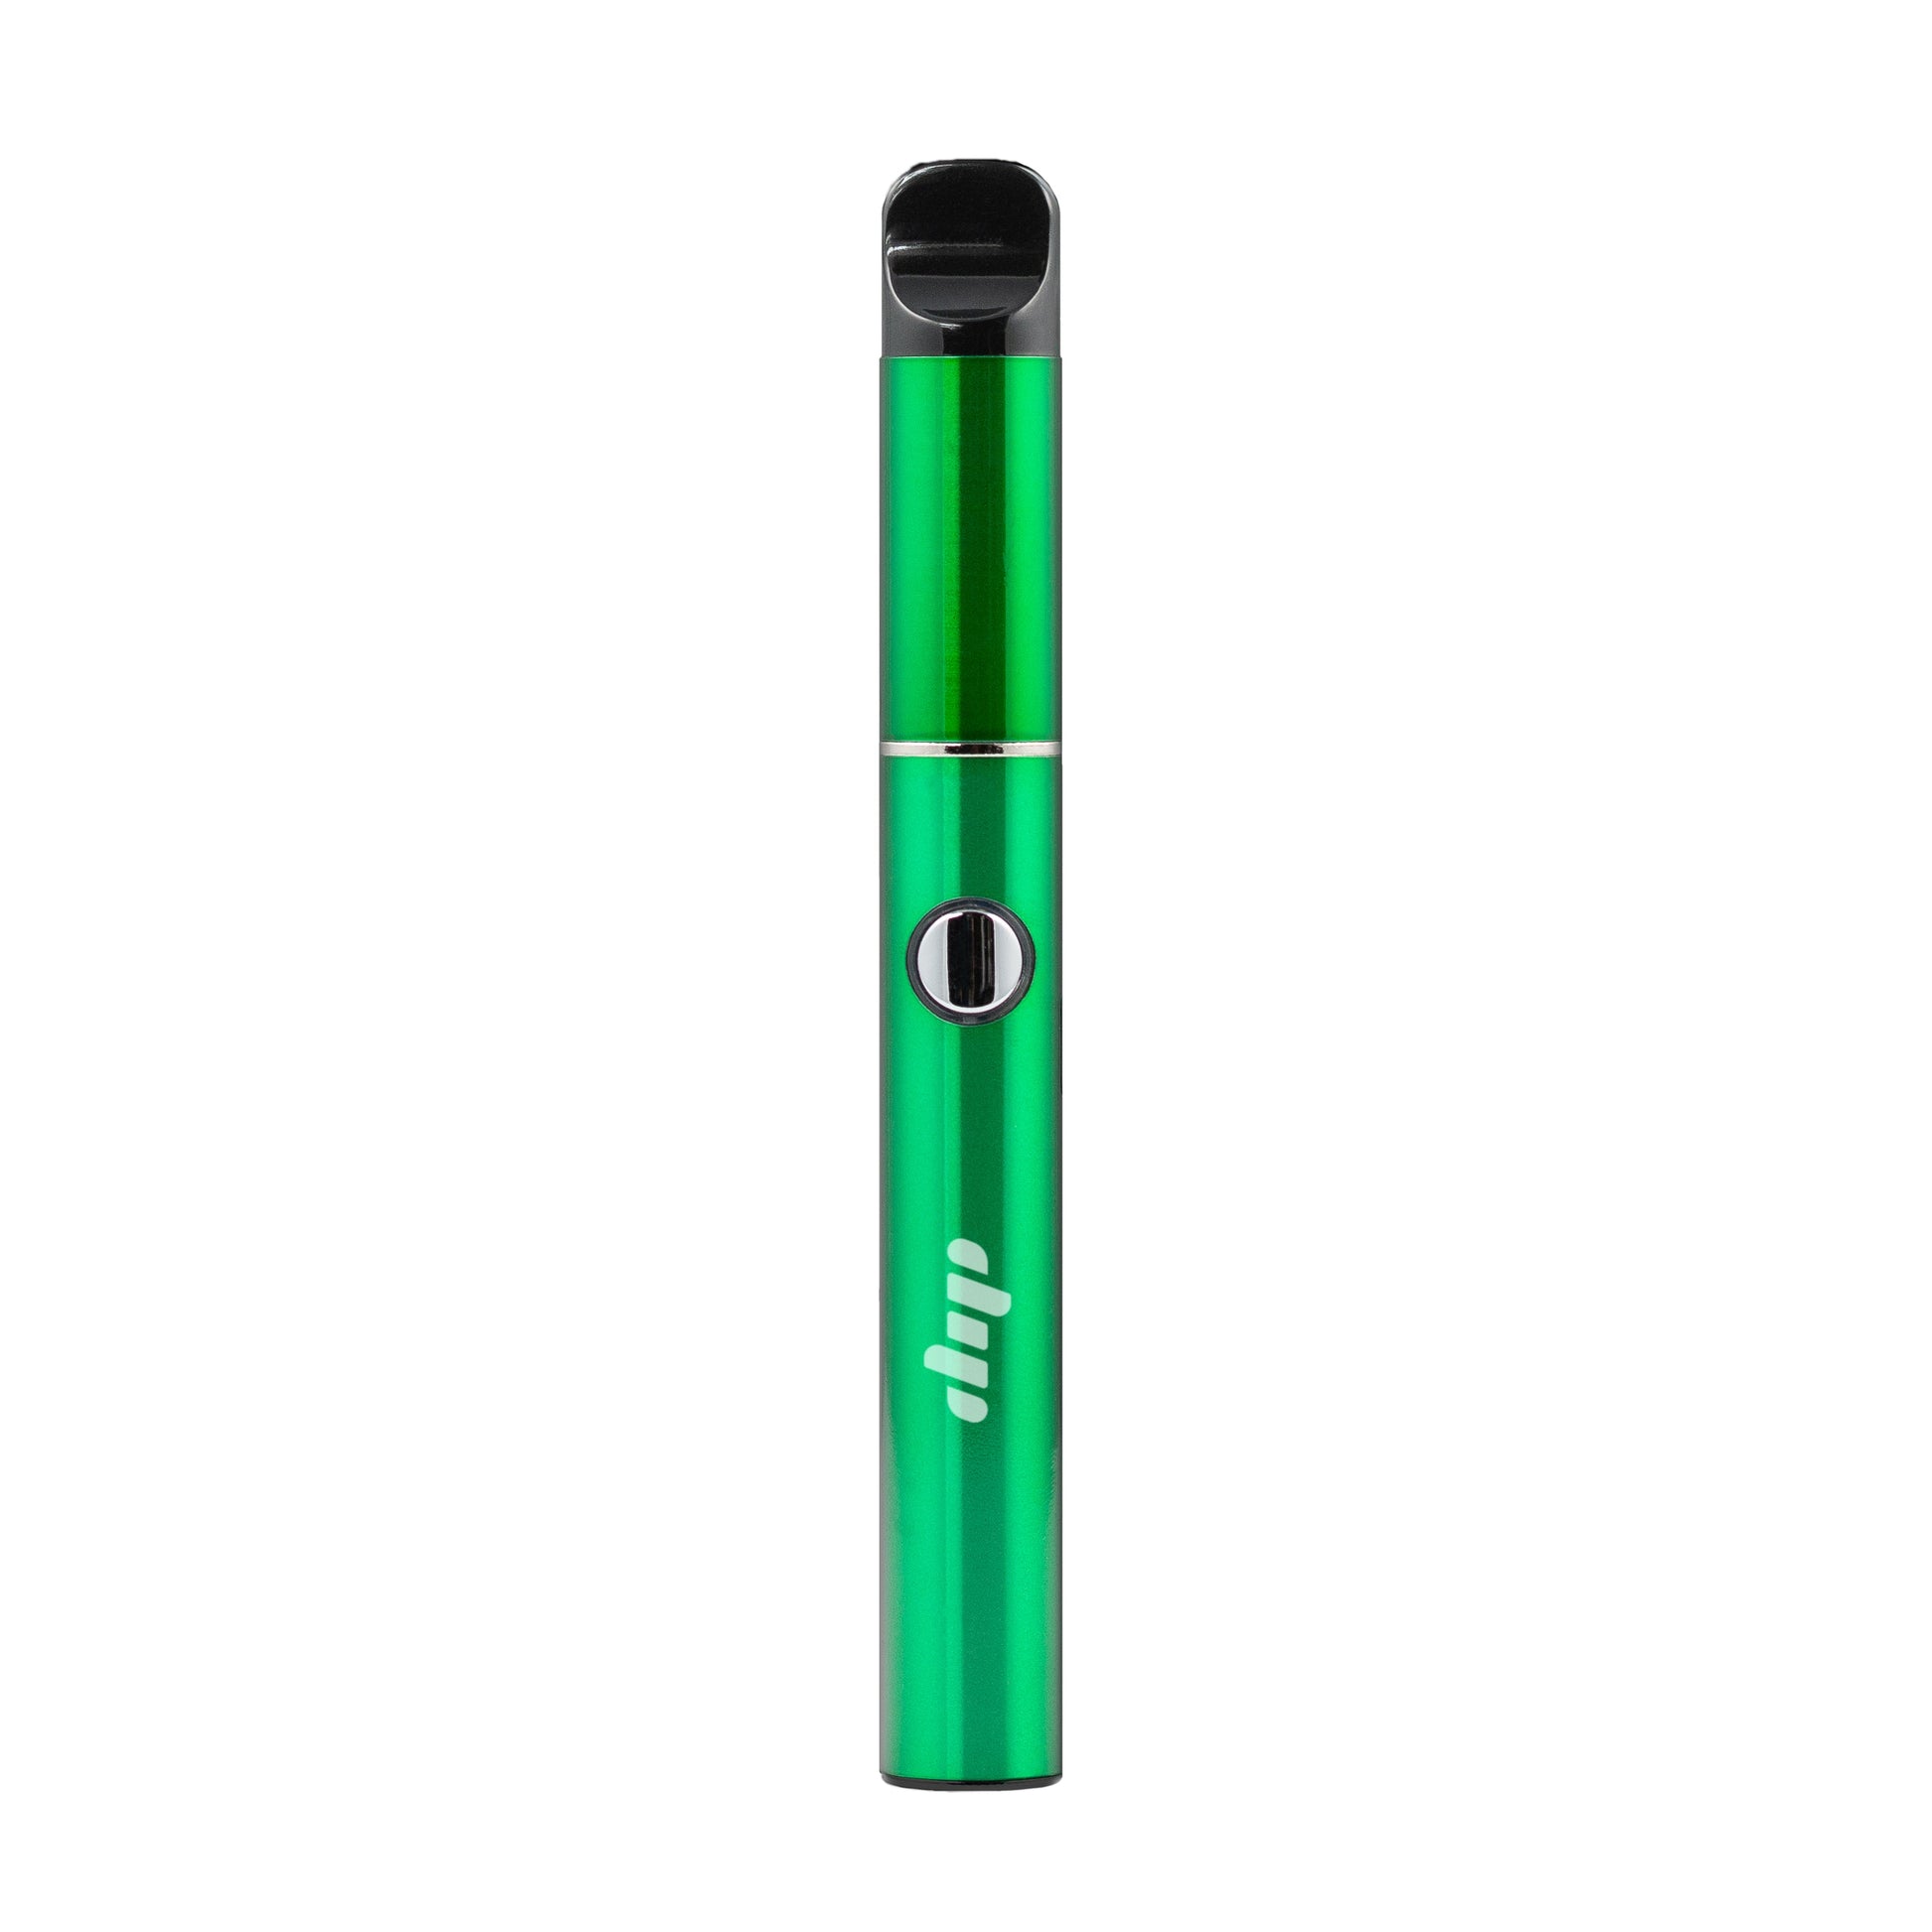 Lunar portable cannabis vaporizer in green with pack-and-go reservoir